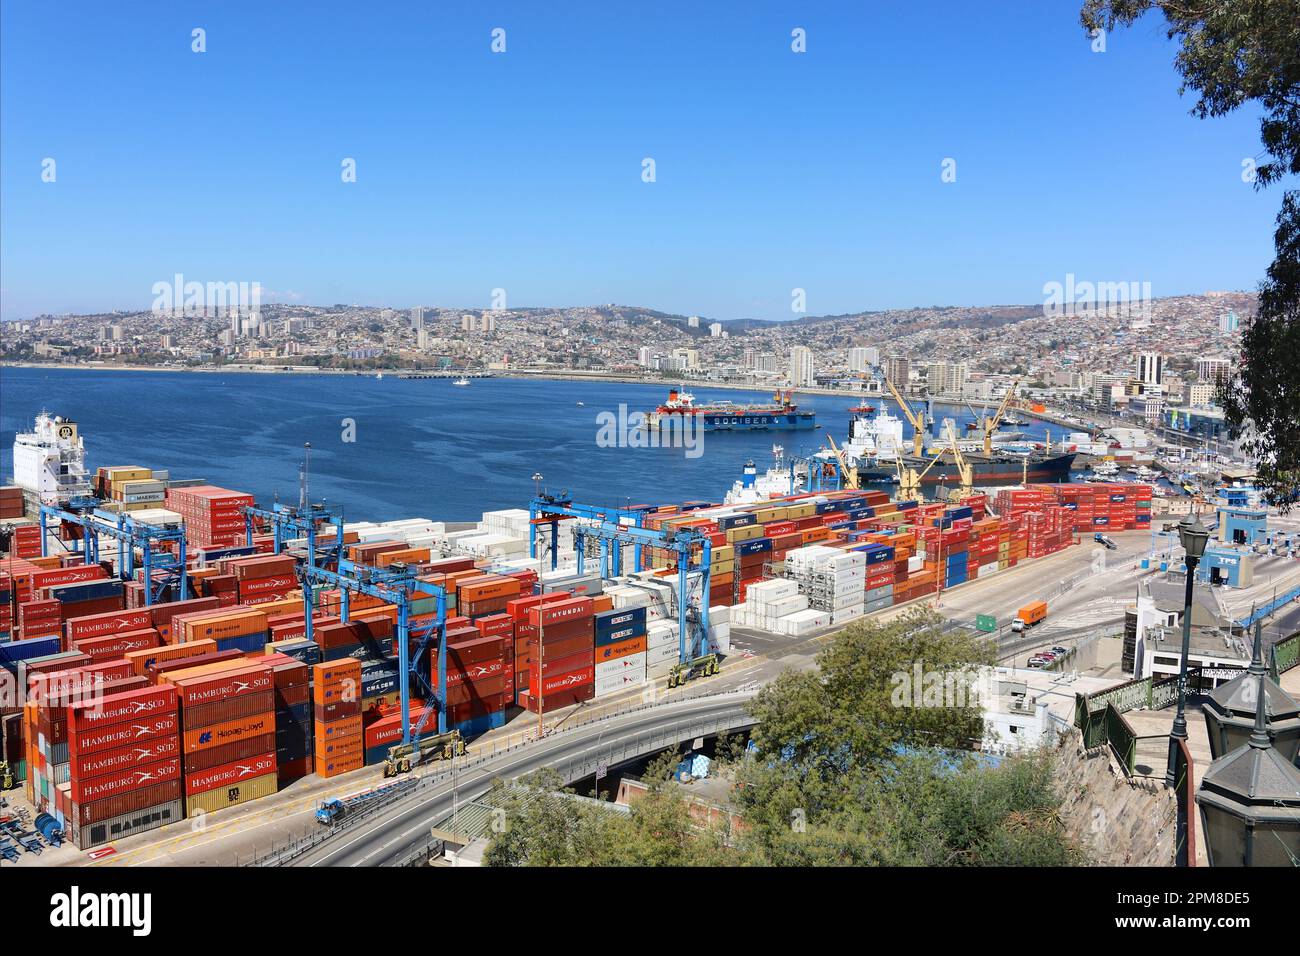 The mythical & colorful Chilean port of Valparaiso, Chile, cargo ship, container ships, industrial habour landscape, floating drydock, dry docks, bay Stock Photo